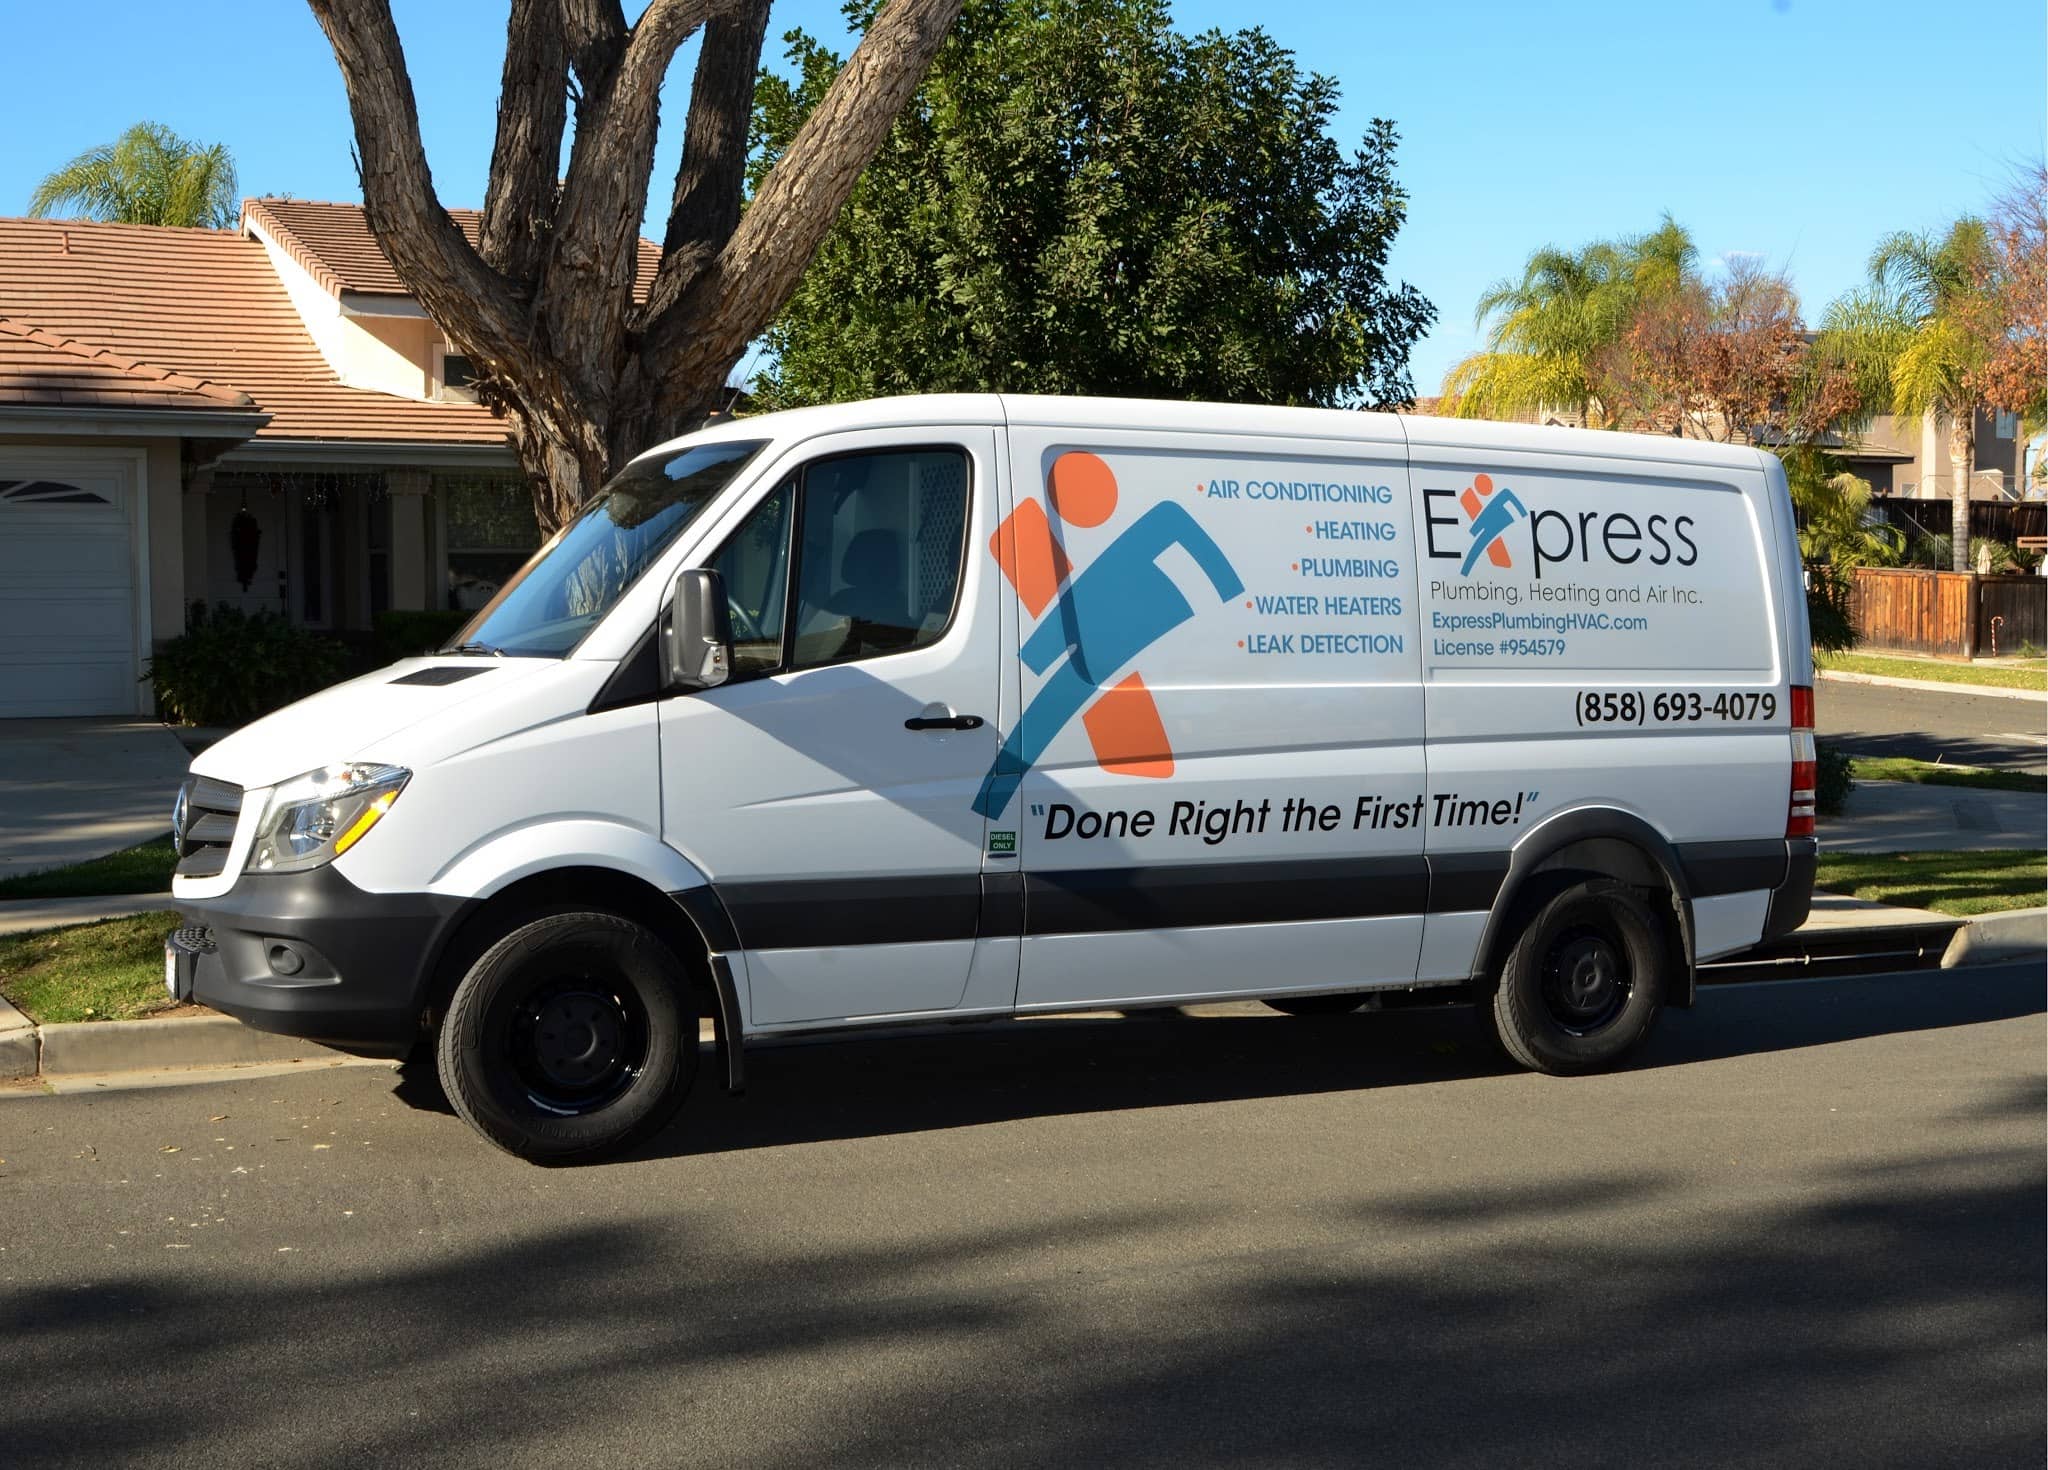 Express Plumbing Heating and Air, Inc. - San Diego, CA, US, plumbing and heating